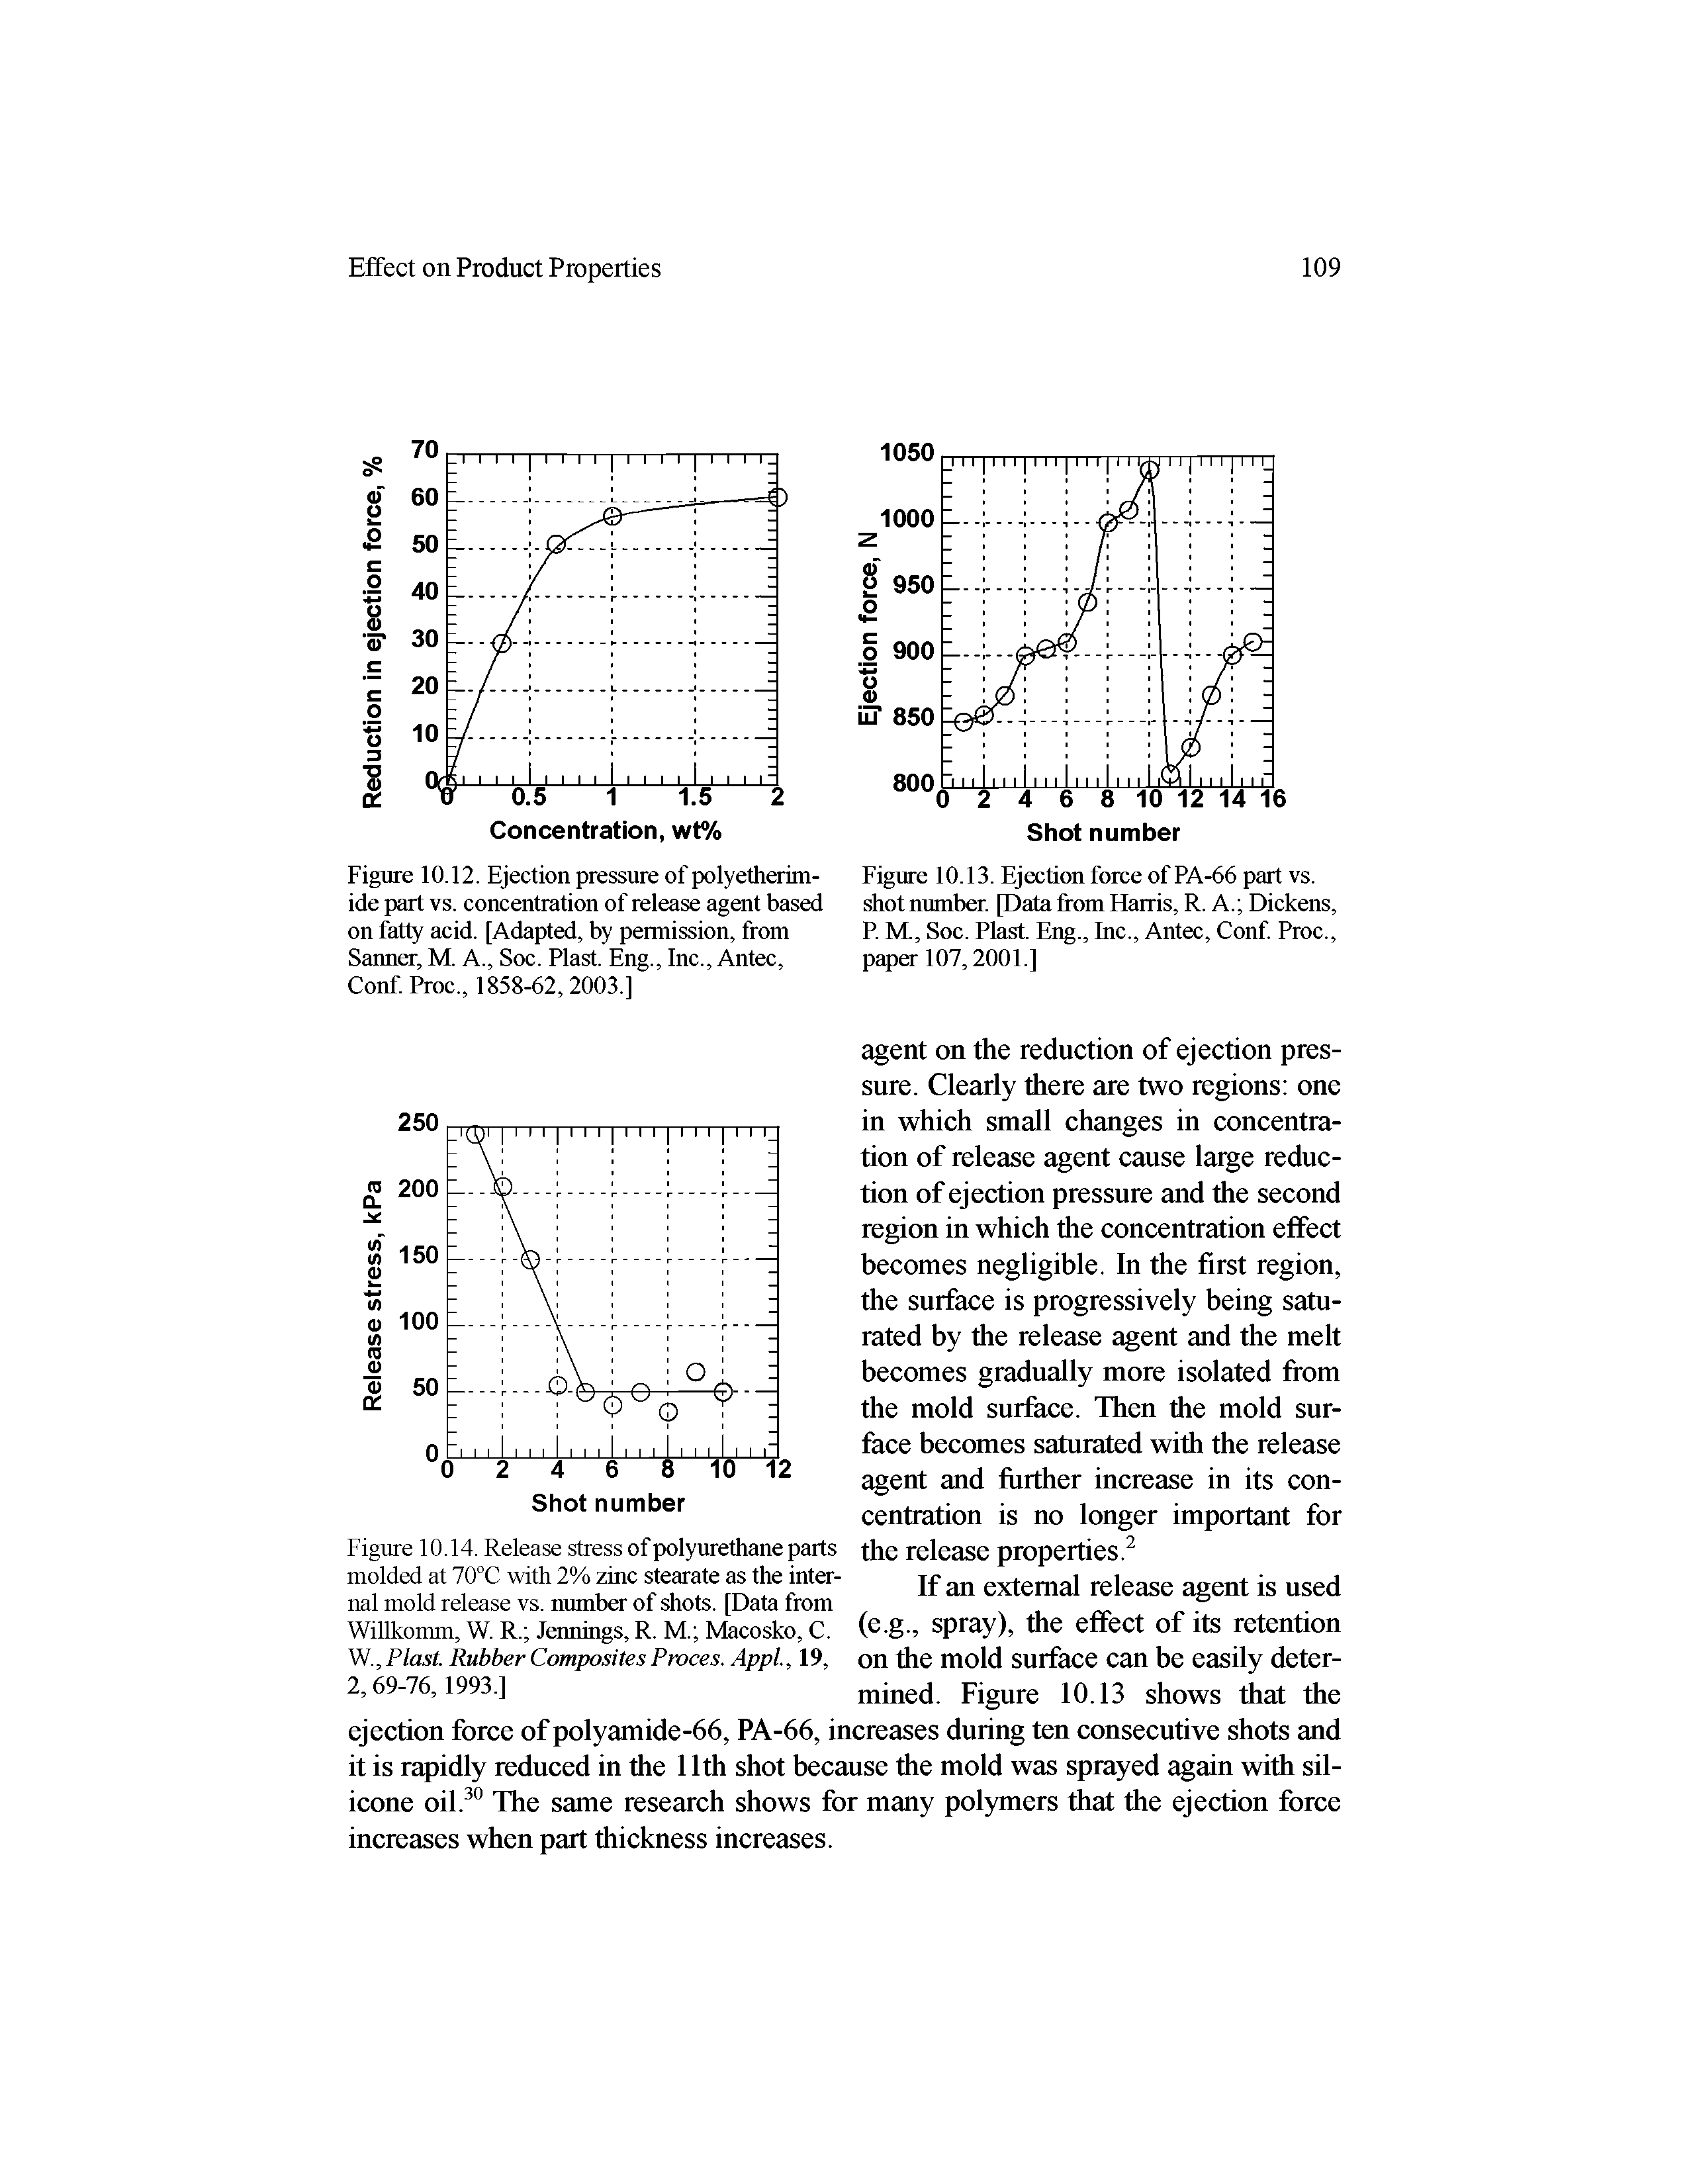 Figure 10.14. Release stress of polyurethane parts molded at 70°C with 2% zinc stearate as the internal mold release vs. number of shots. [Data from Willkomm, W. R. Jennings, R. M. Macosko, C. W., Plast. Rubber Composites Proces. Appl, 19, 2,69-76, 1993.]...